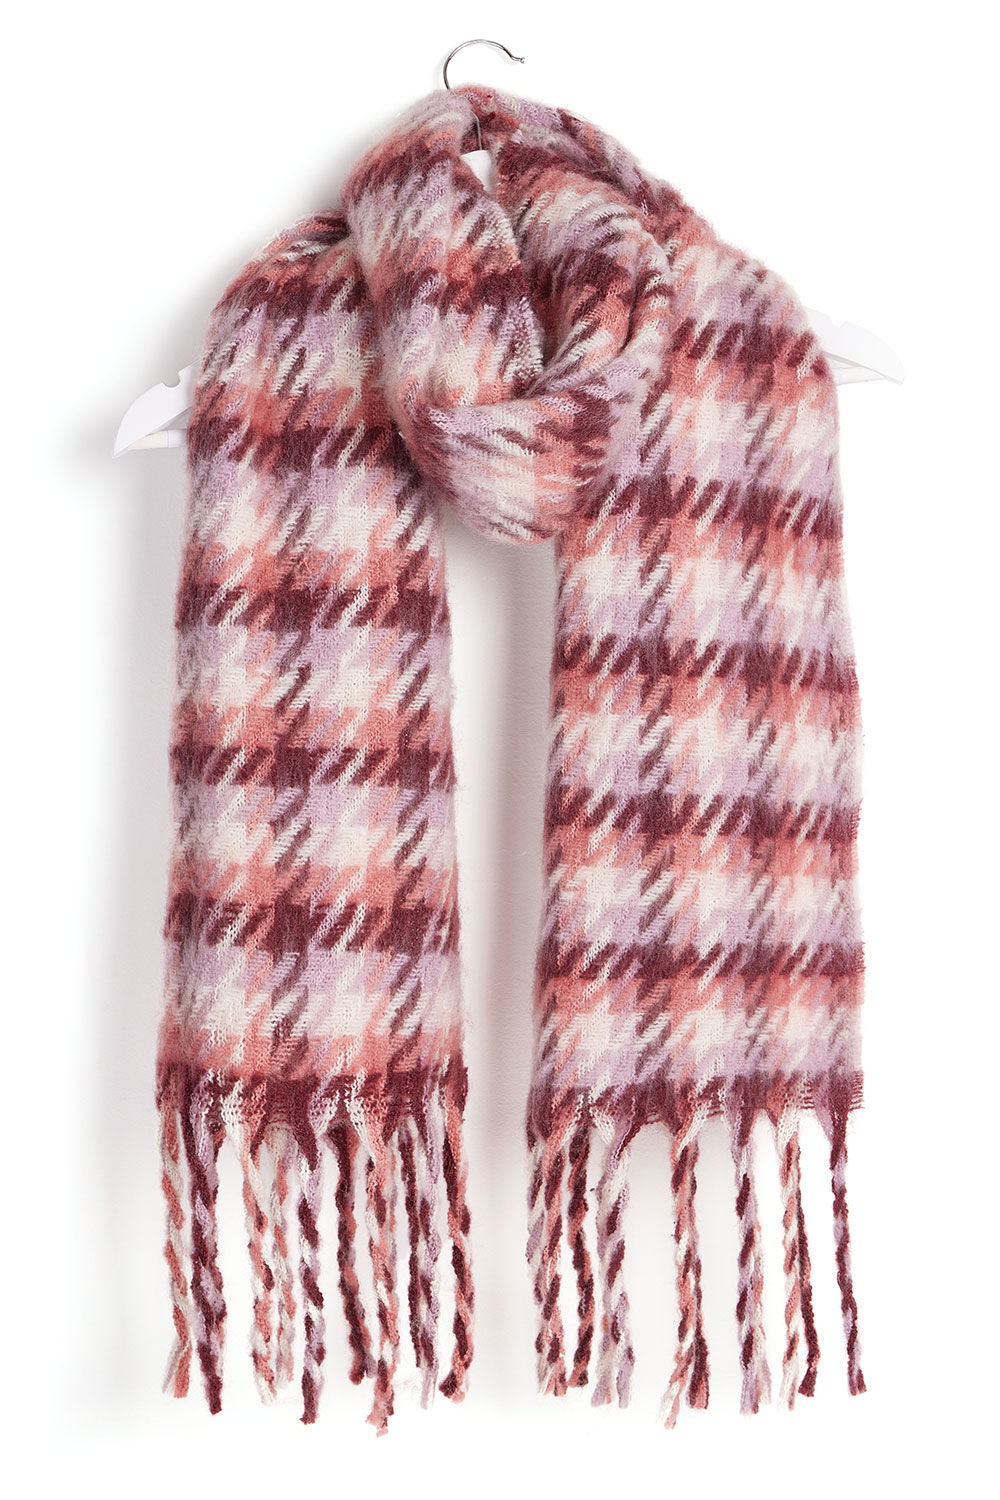 Bonmarche Burgundy Red Dogtooth Check Scarf, Size: One Size